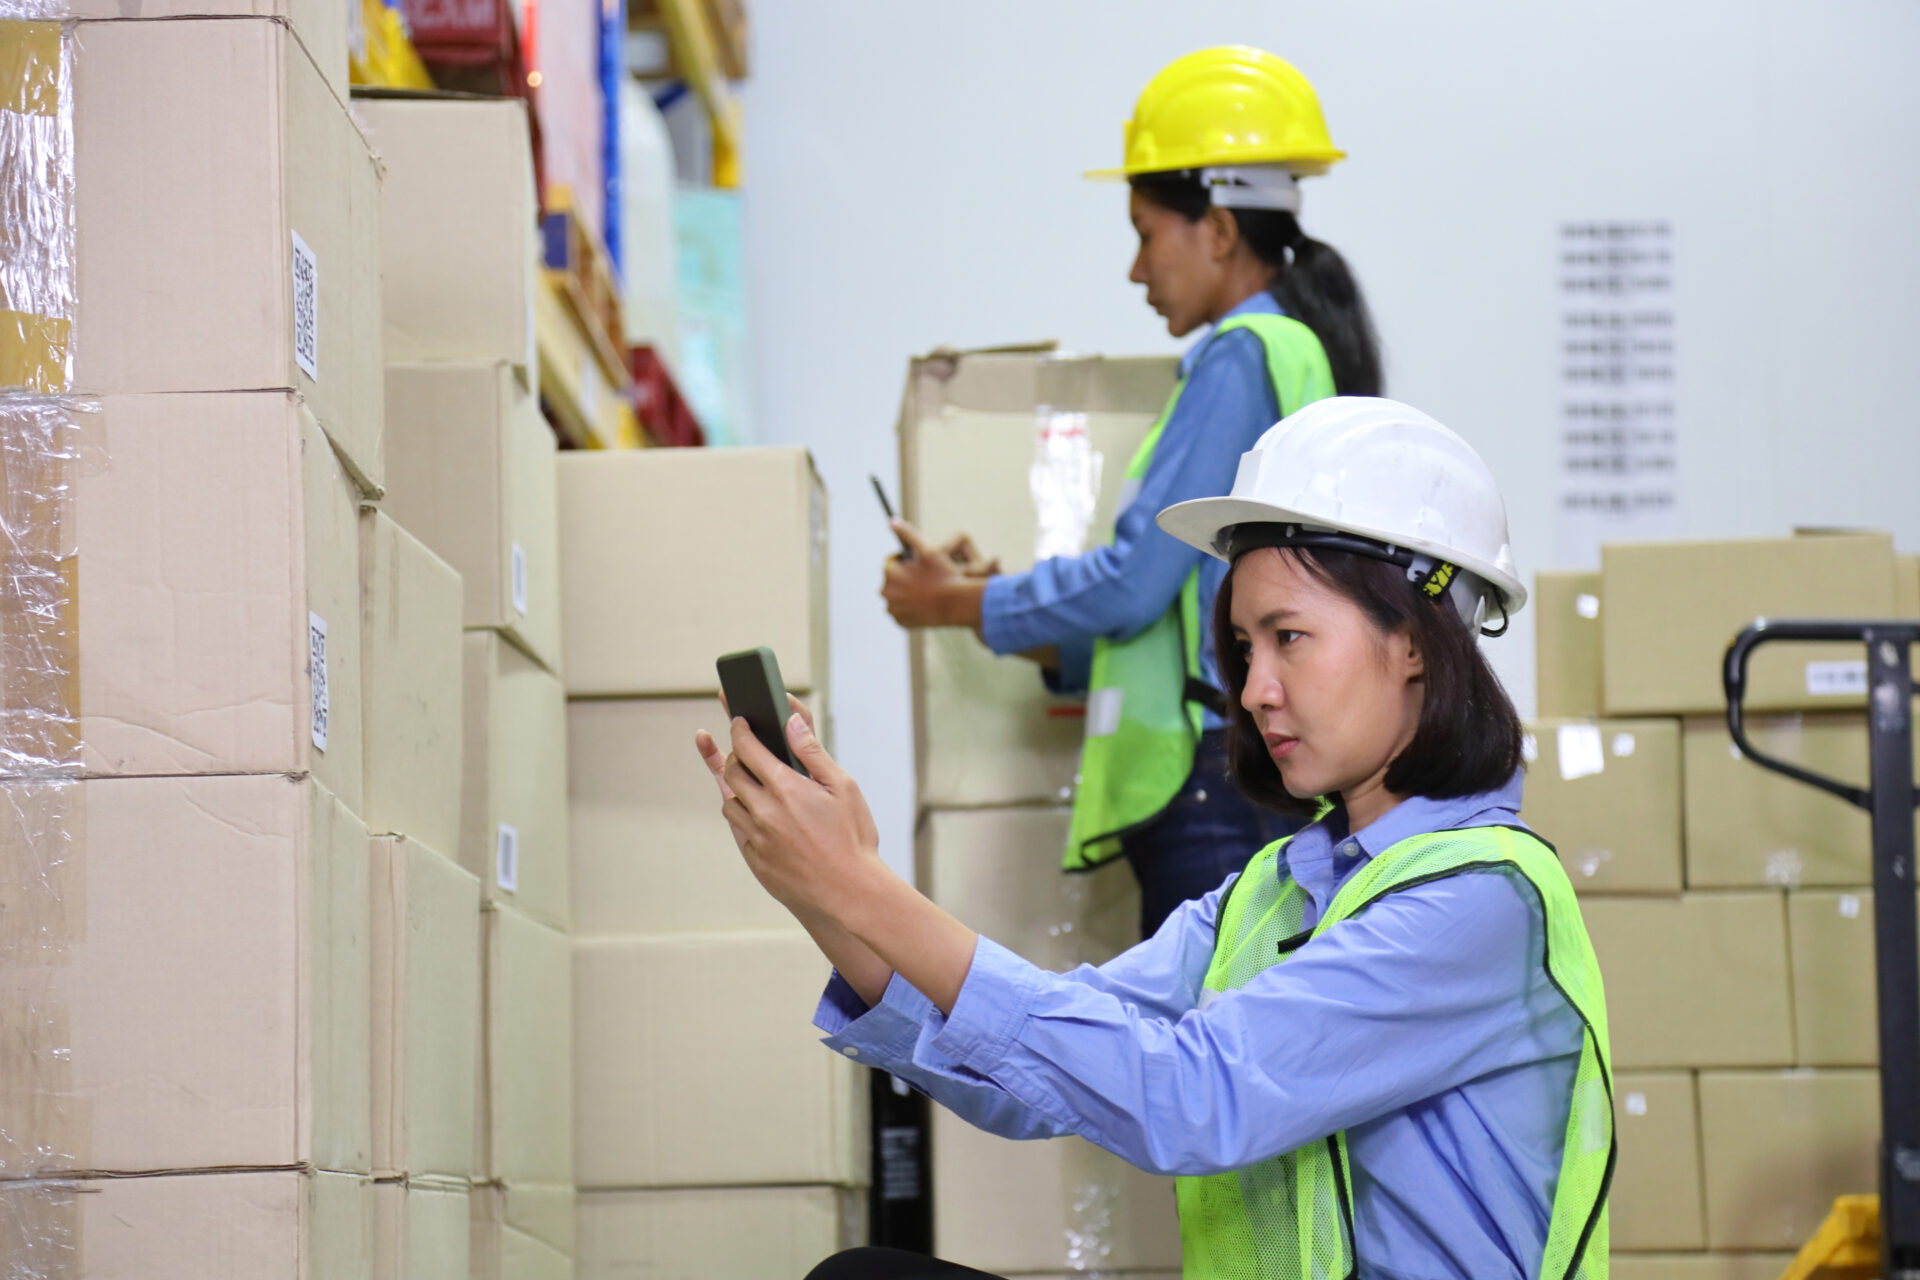 Two women scanning codes in warehouse